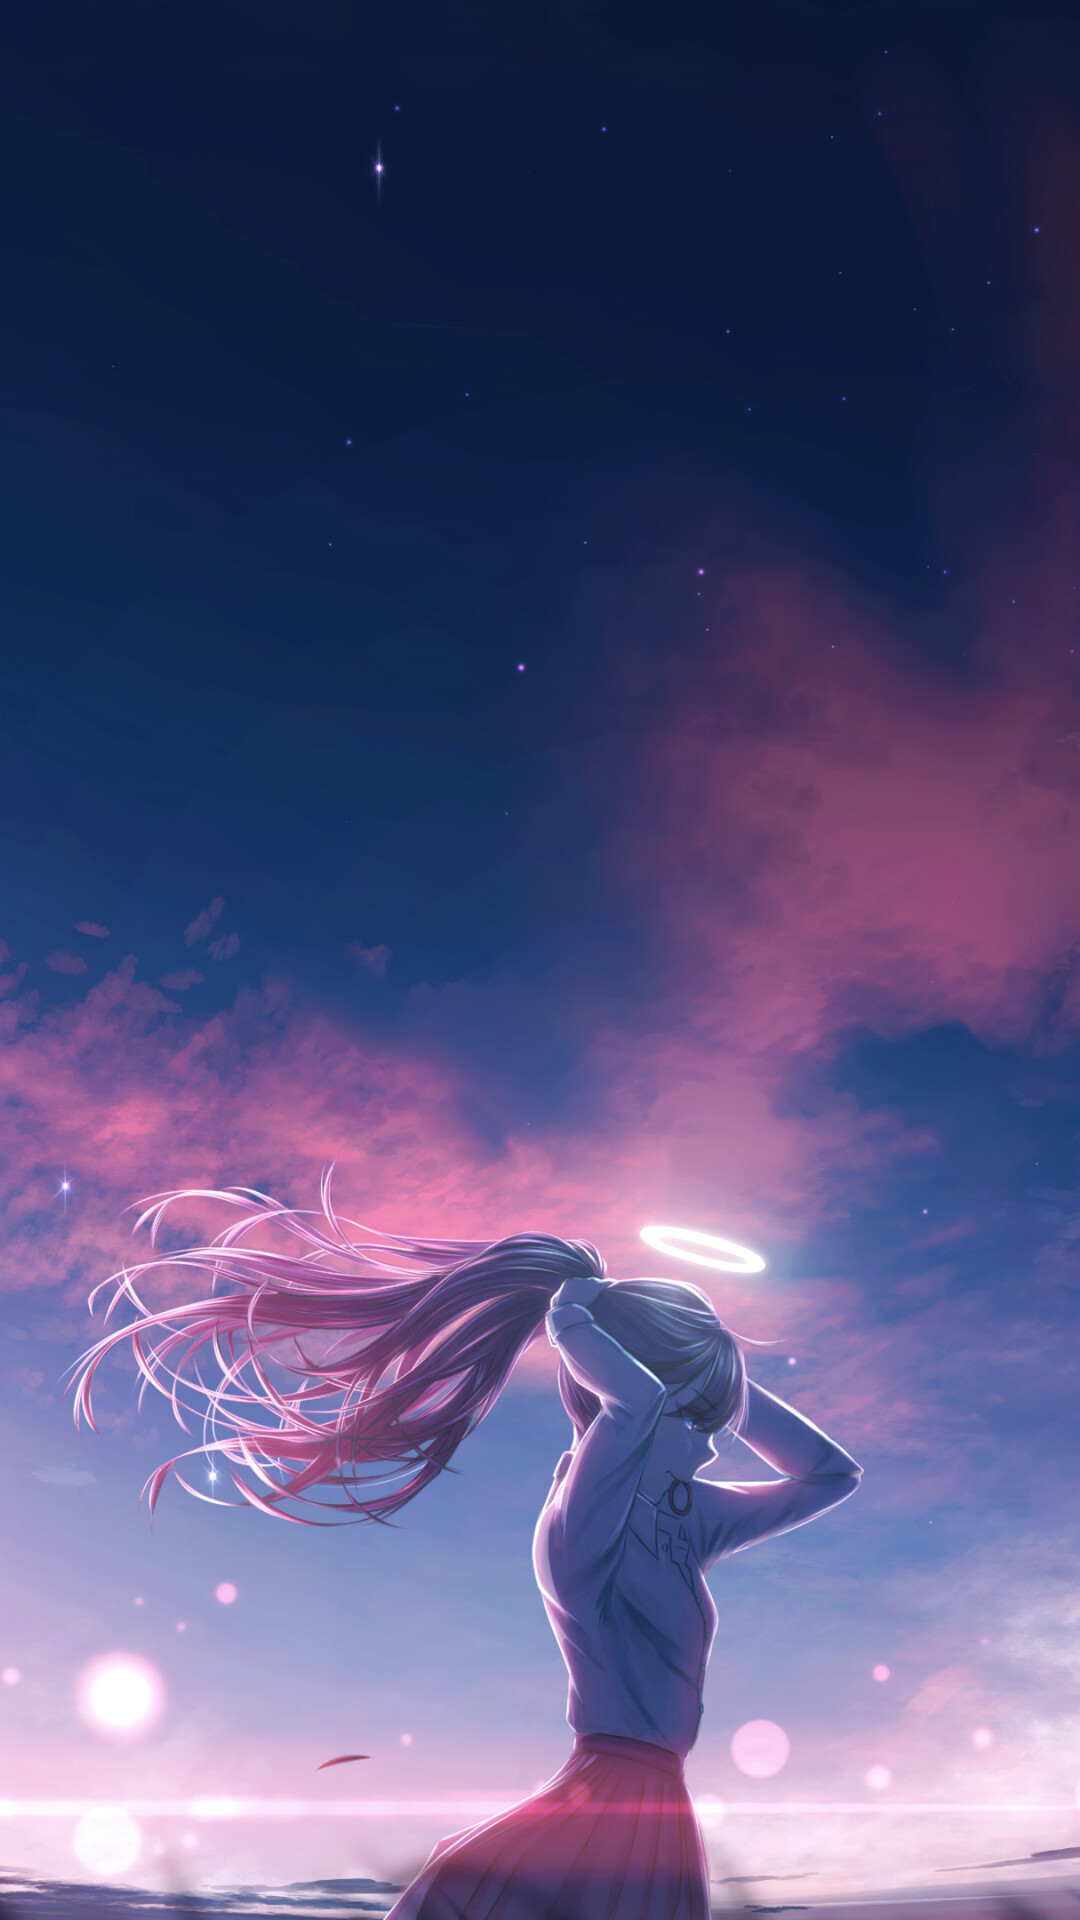 Girly: Night sky, Shining lights, Japanese anime character, The girl with long hair. 1080x1920 Full HD Background.